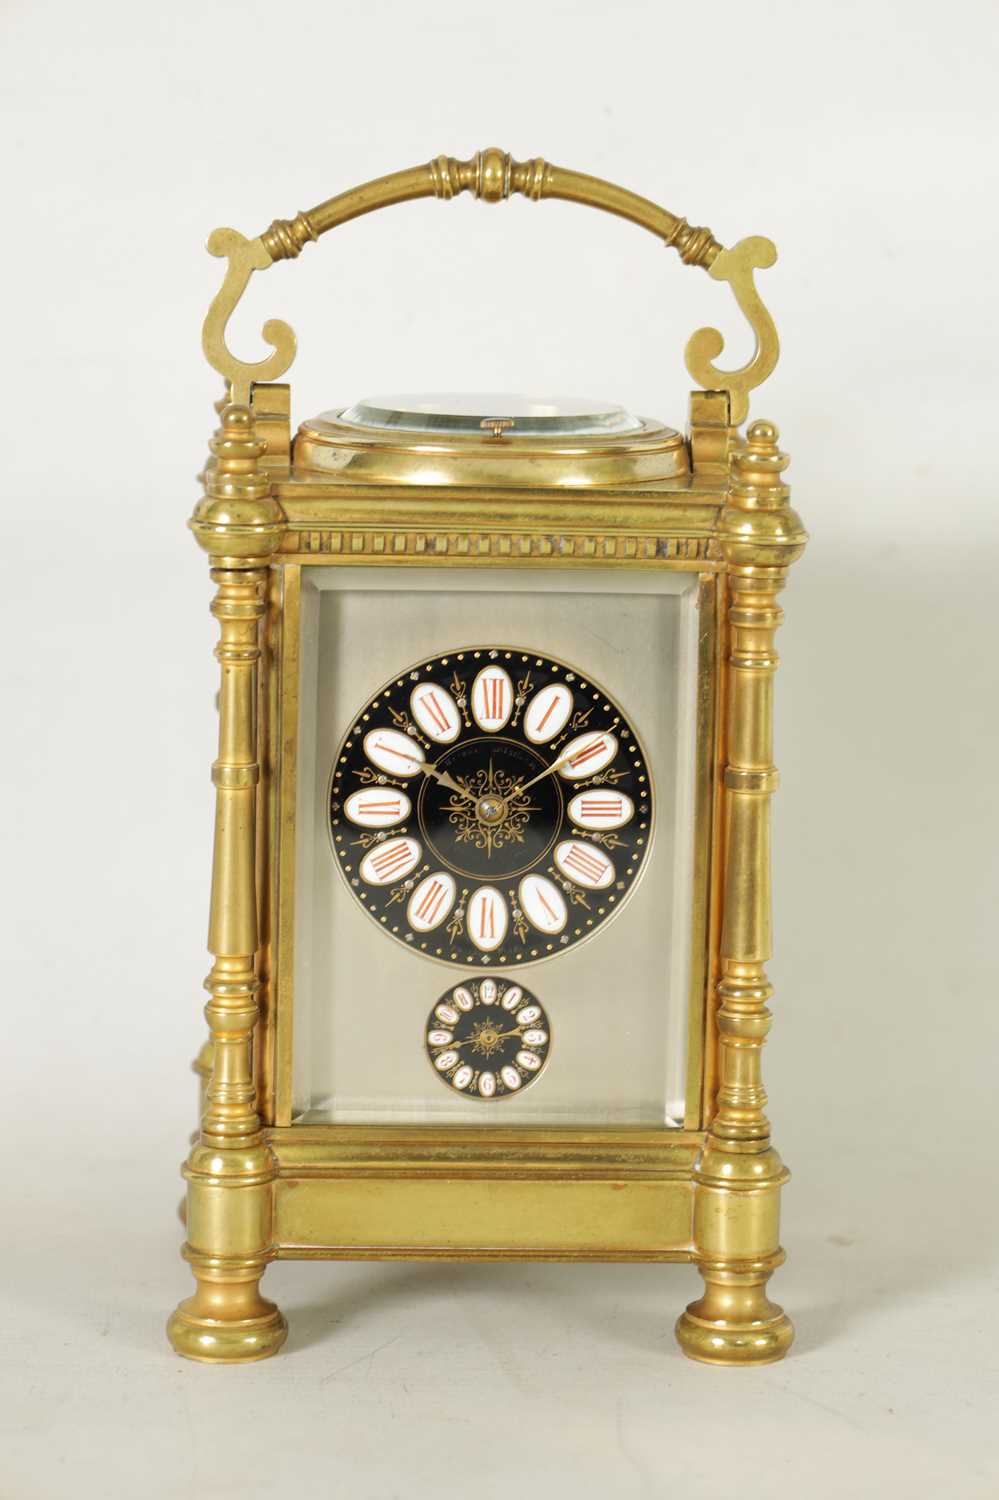 A LARGE LATE 19TH CENTURY FRENCH REPEATING CARRIAGE CLOCK - Image 2 of 12